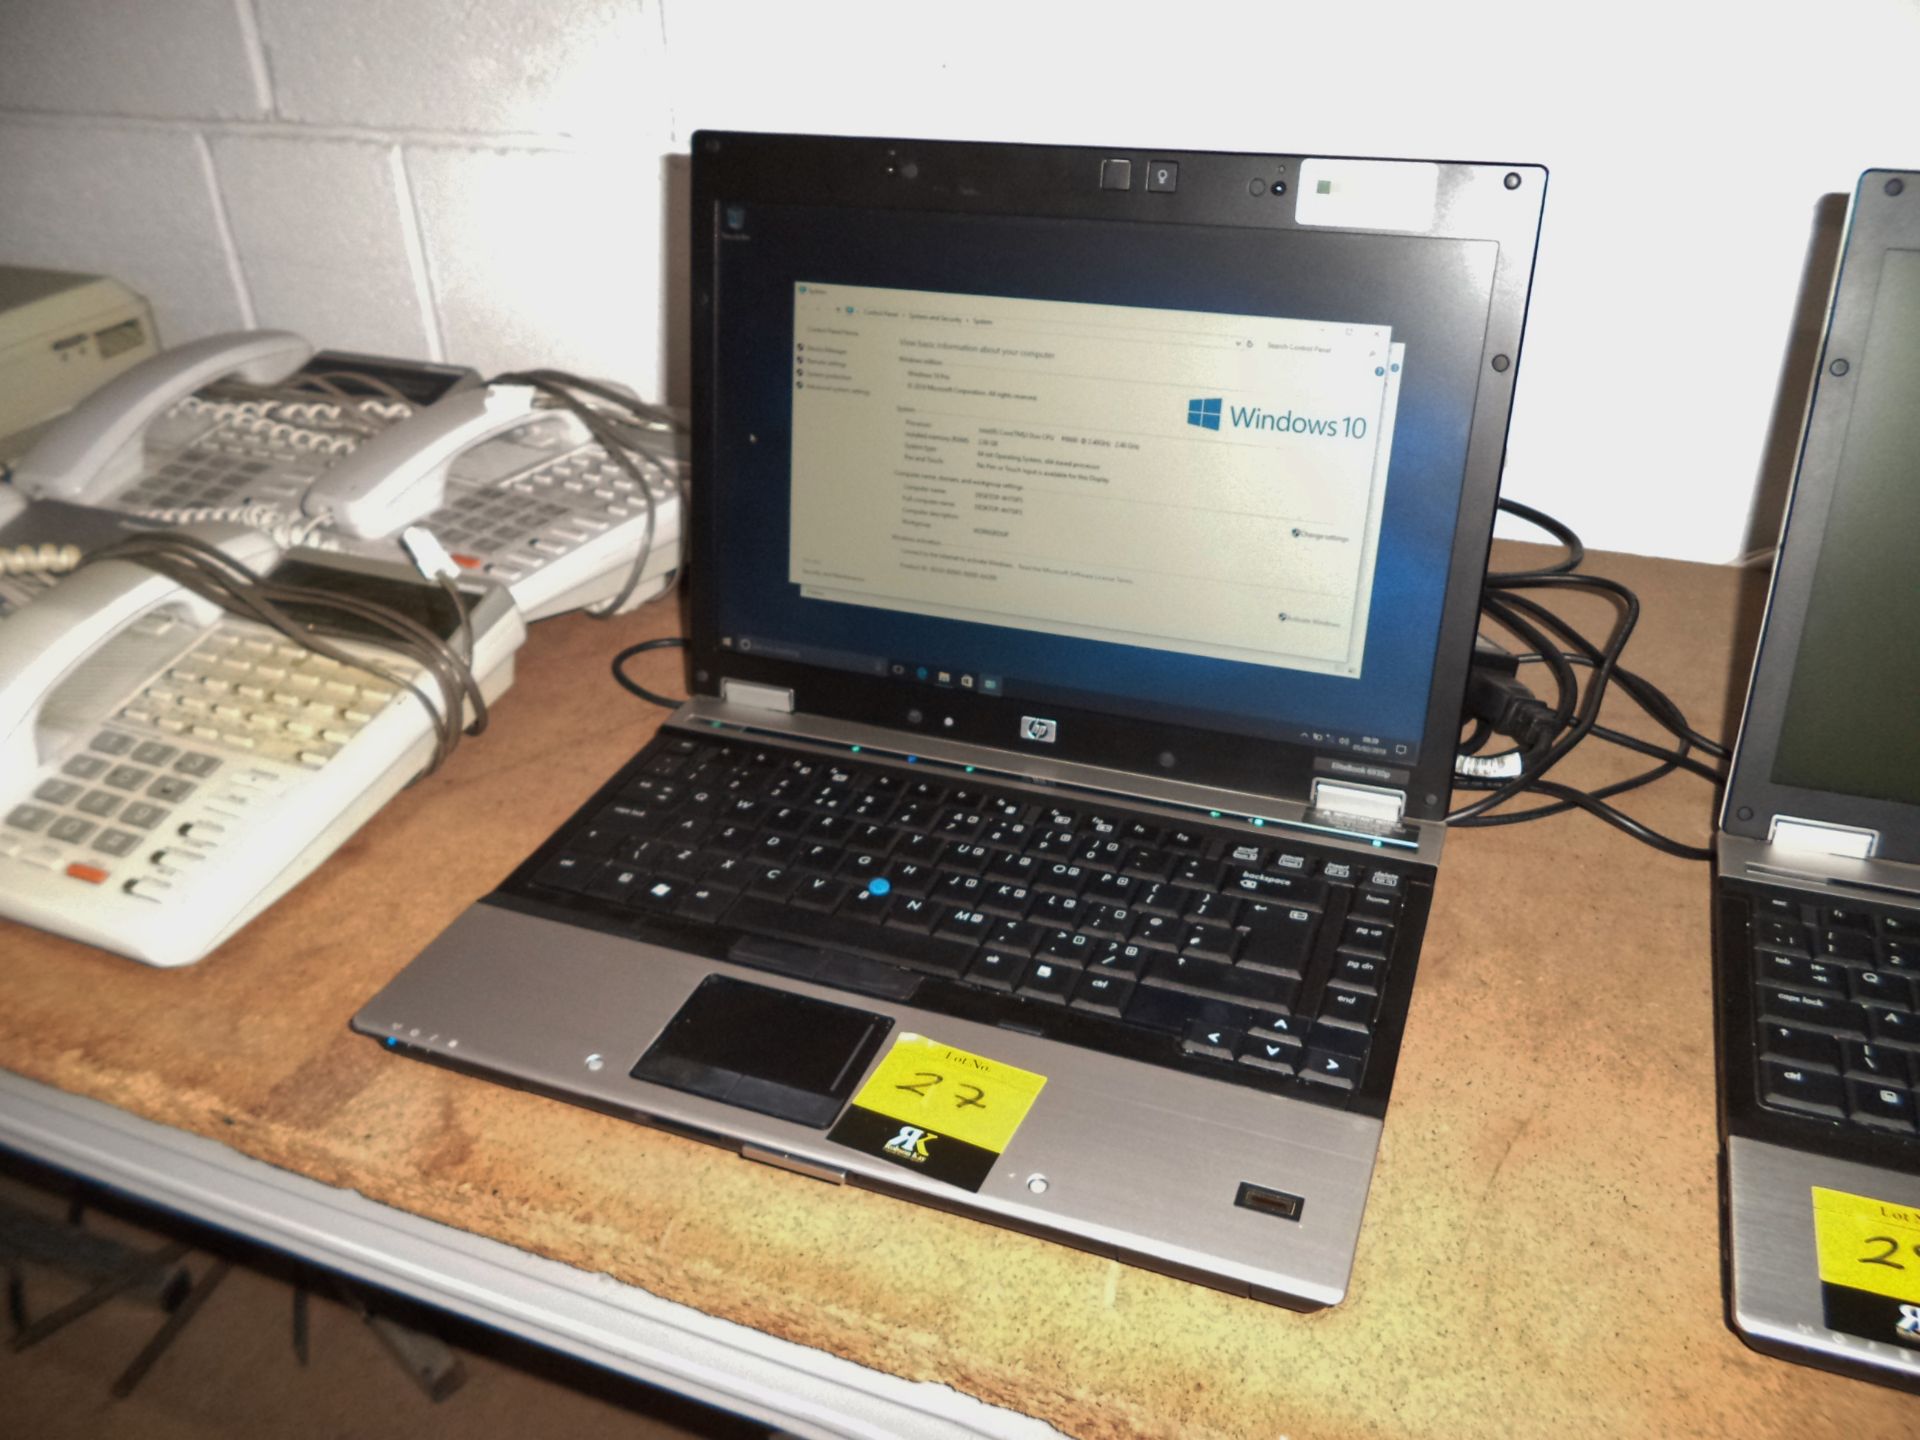 HP Elitebook 6930P notebook computer with Intel Core 2 Duo P8600 @ 2.4GHz, 2Gb RAM & 160Gb HDD